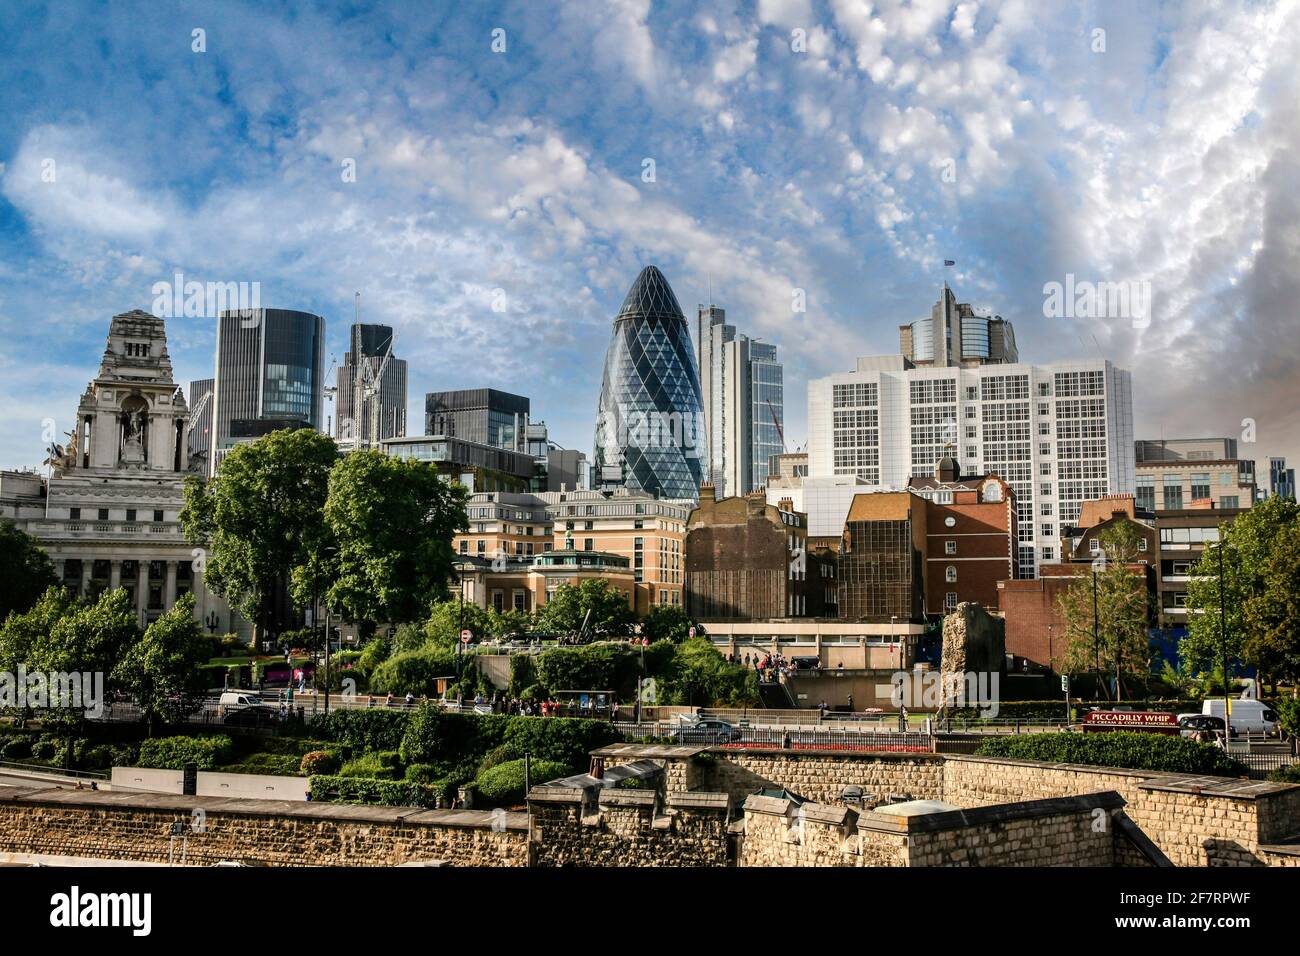 View of the Finacial district of the City of London with the Gerkin building Stock Photo